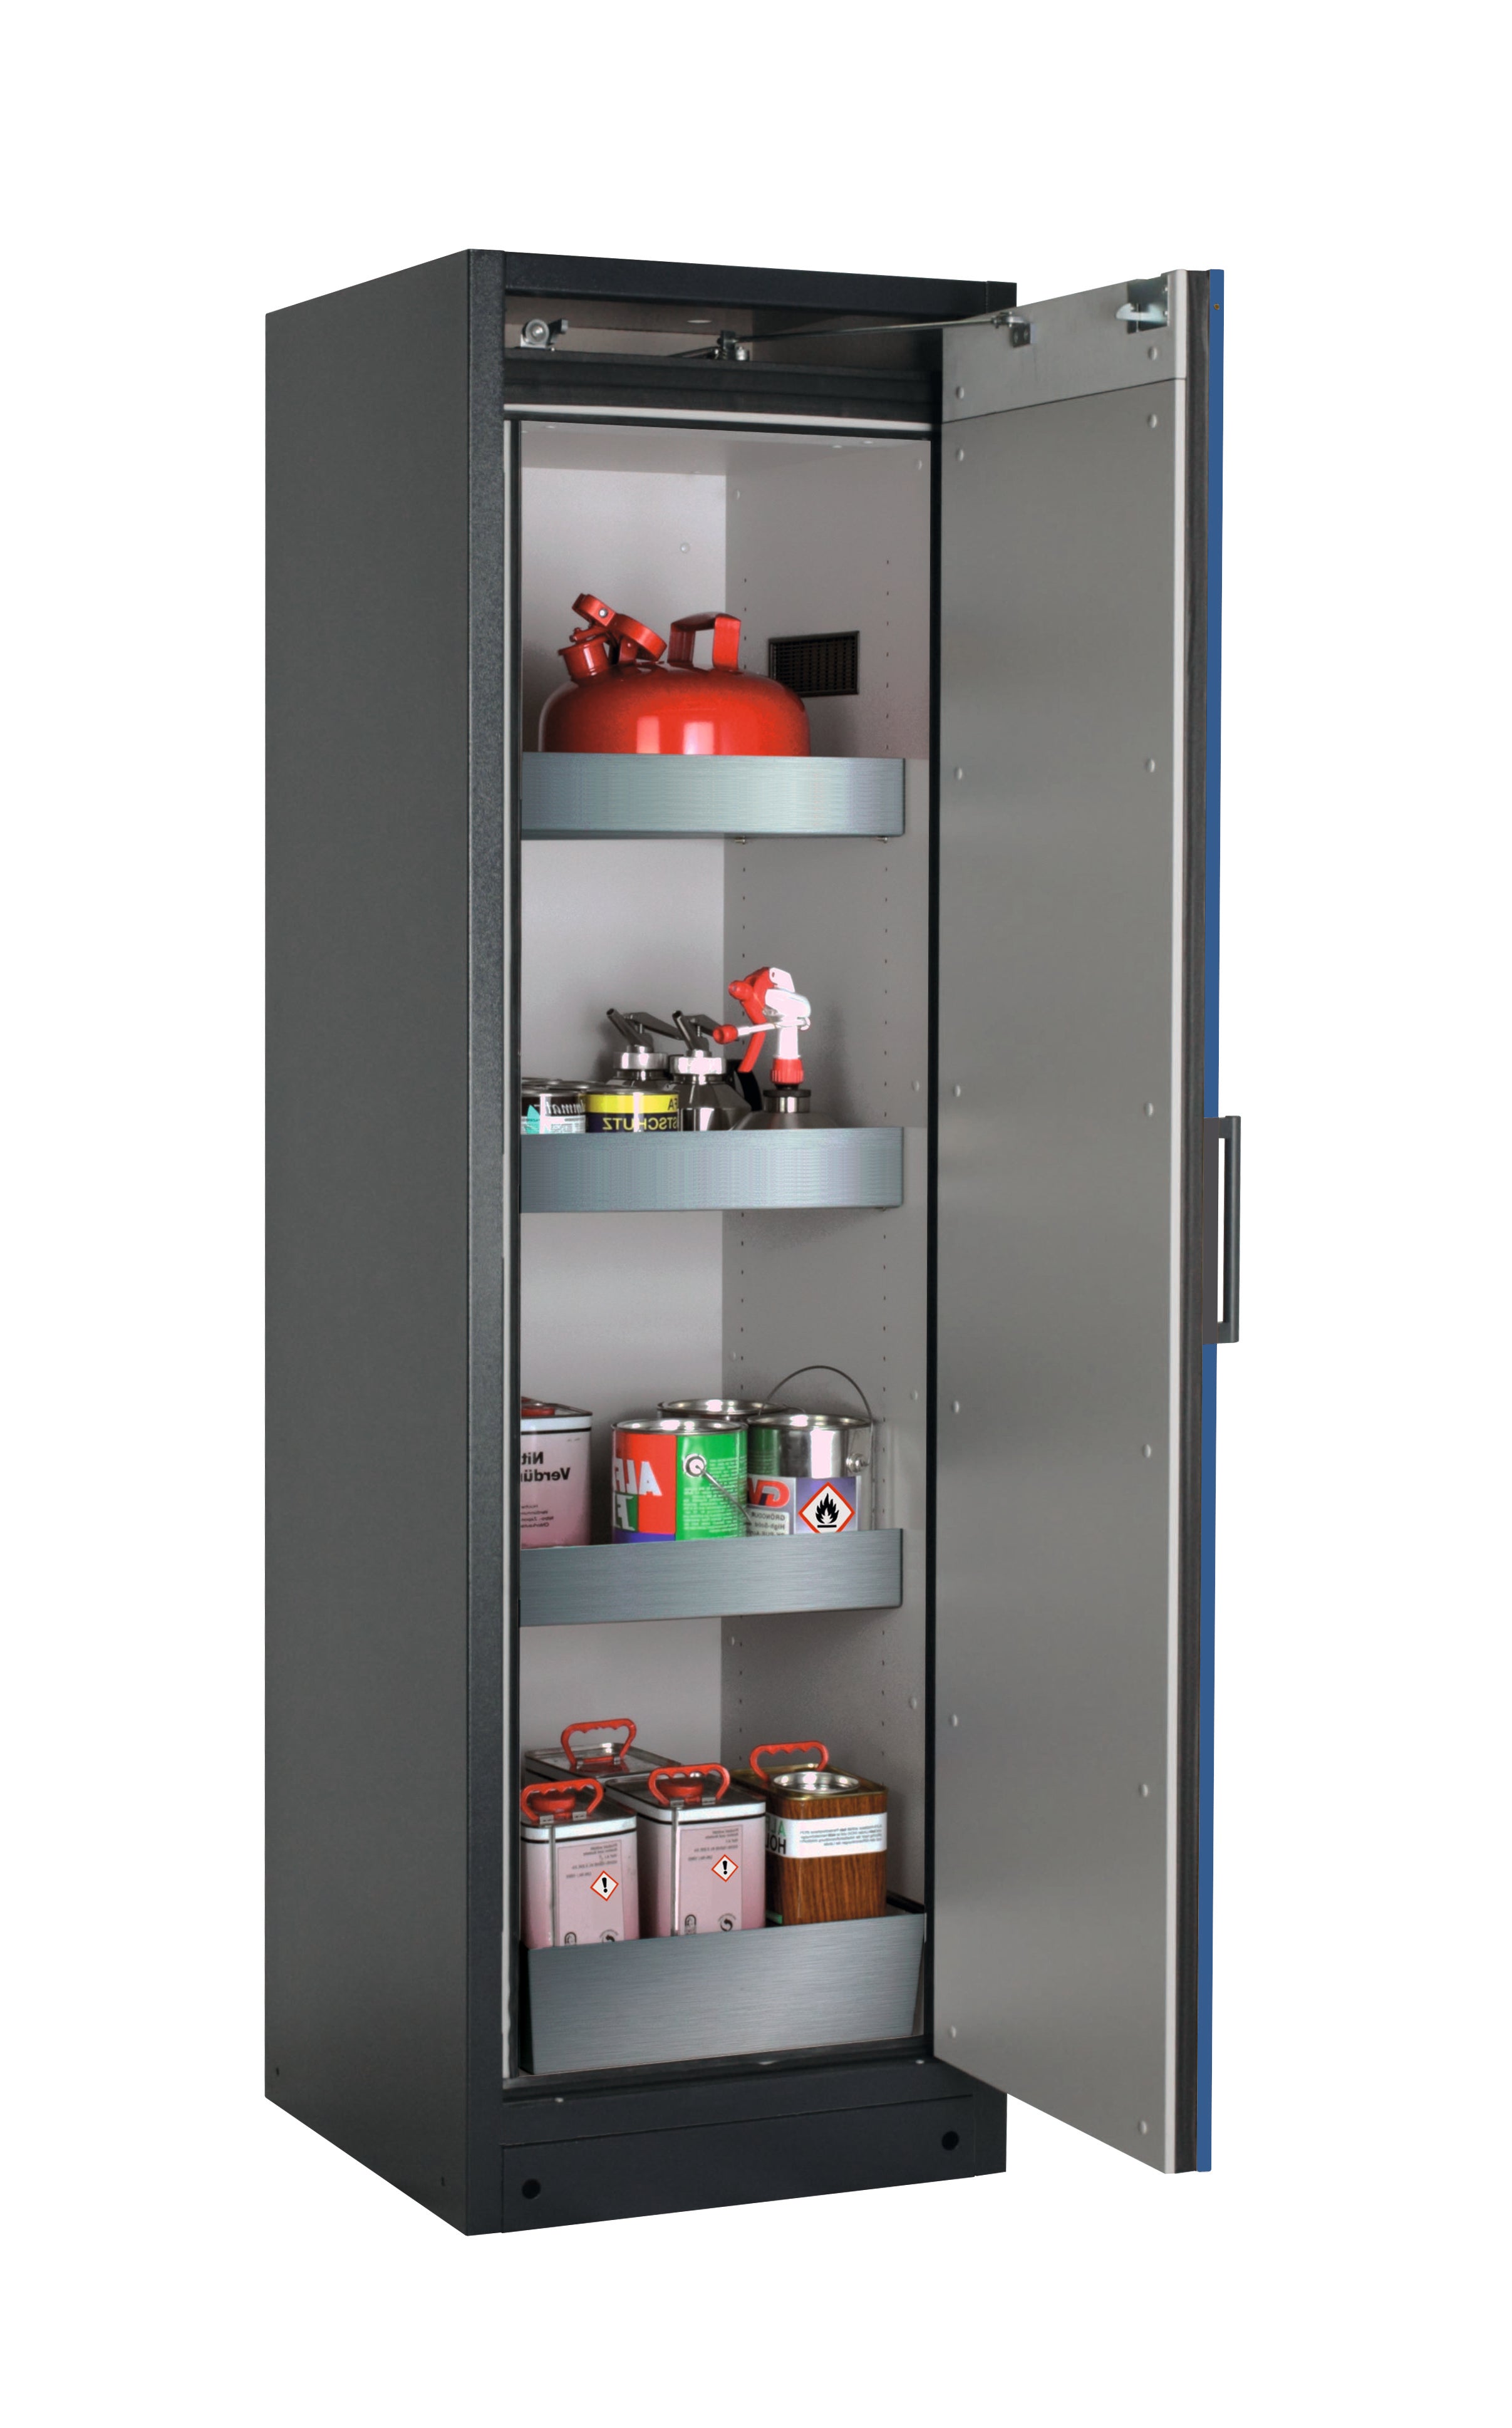 Type 90 safety storage cabinet Q-PEGASUS-90 model Q90.195.060.WDACR in gentian blue RAL 5010 with 3x tray shelf (standard) (stainless steel 1.4301),